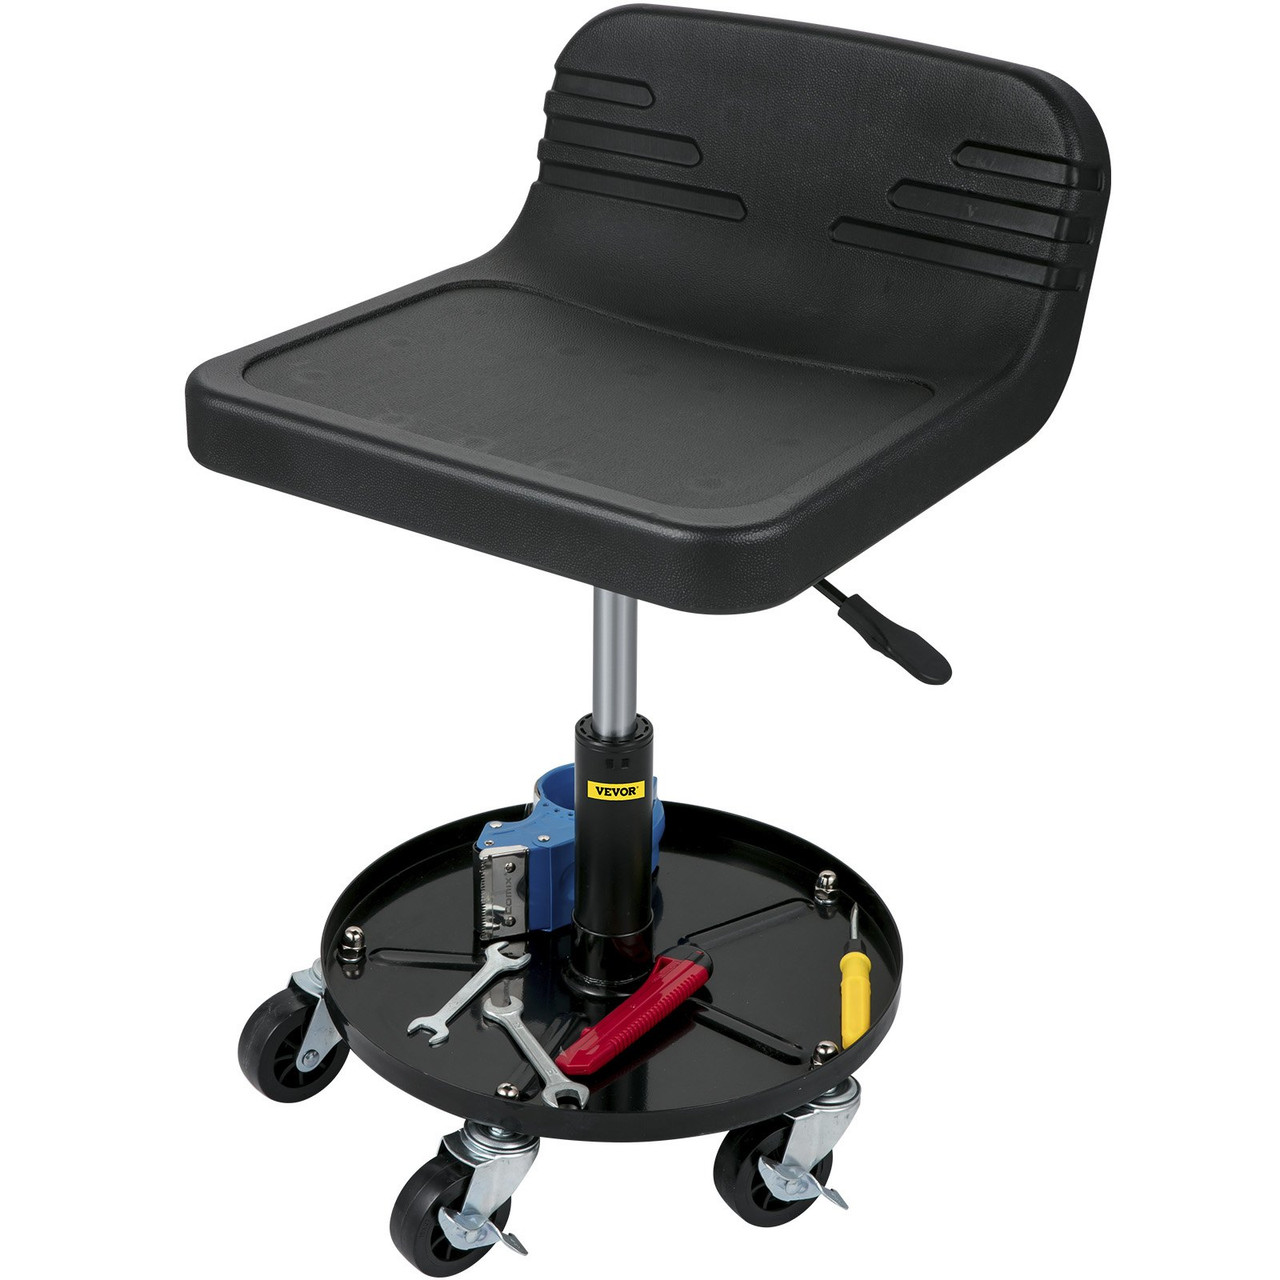 Rolling Garage Stool, 300LBS Capacity, Adjustable Height from 15.7 in to 20.5 in, Mechanic Seat with 360-degree Swivel Wheels and Tool Tray, for